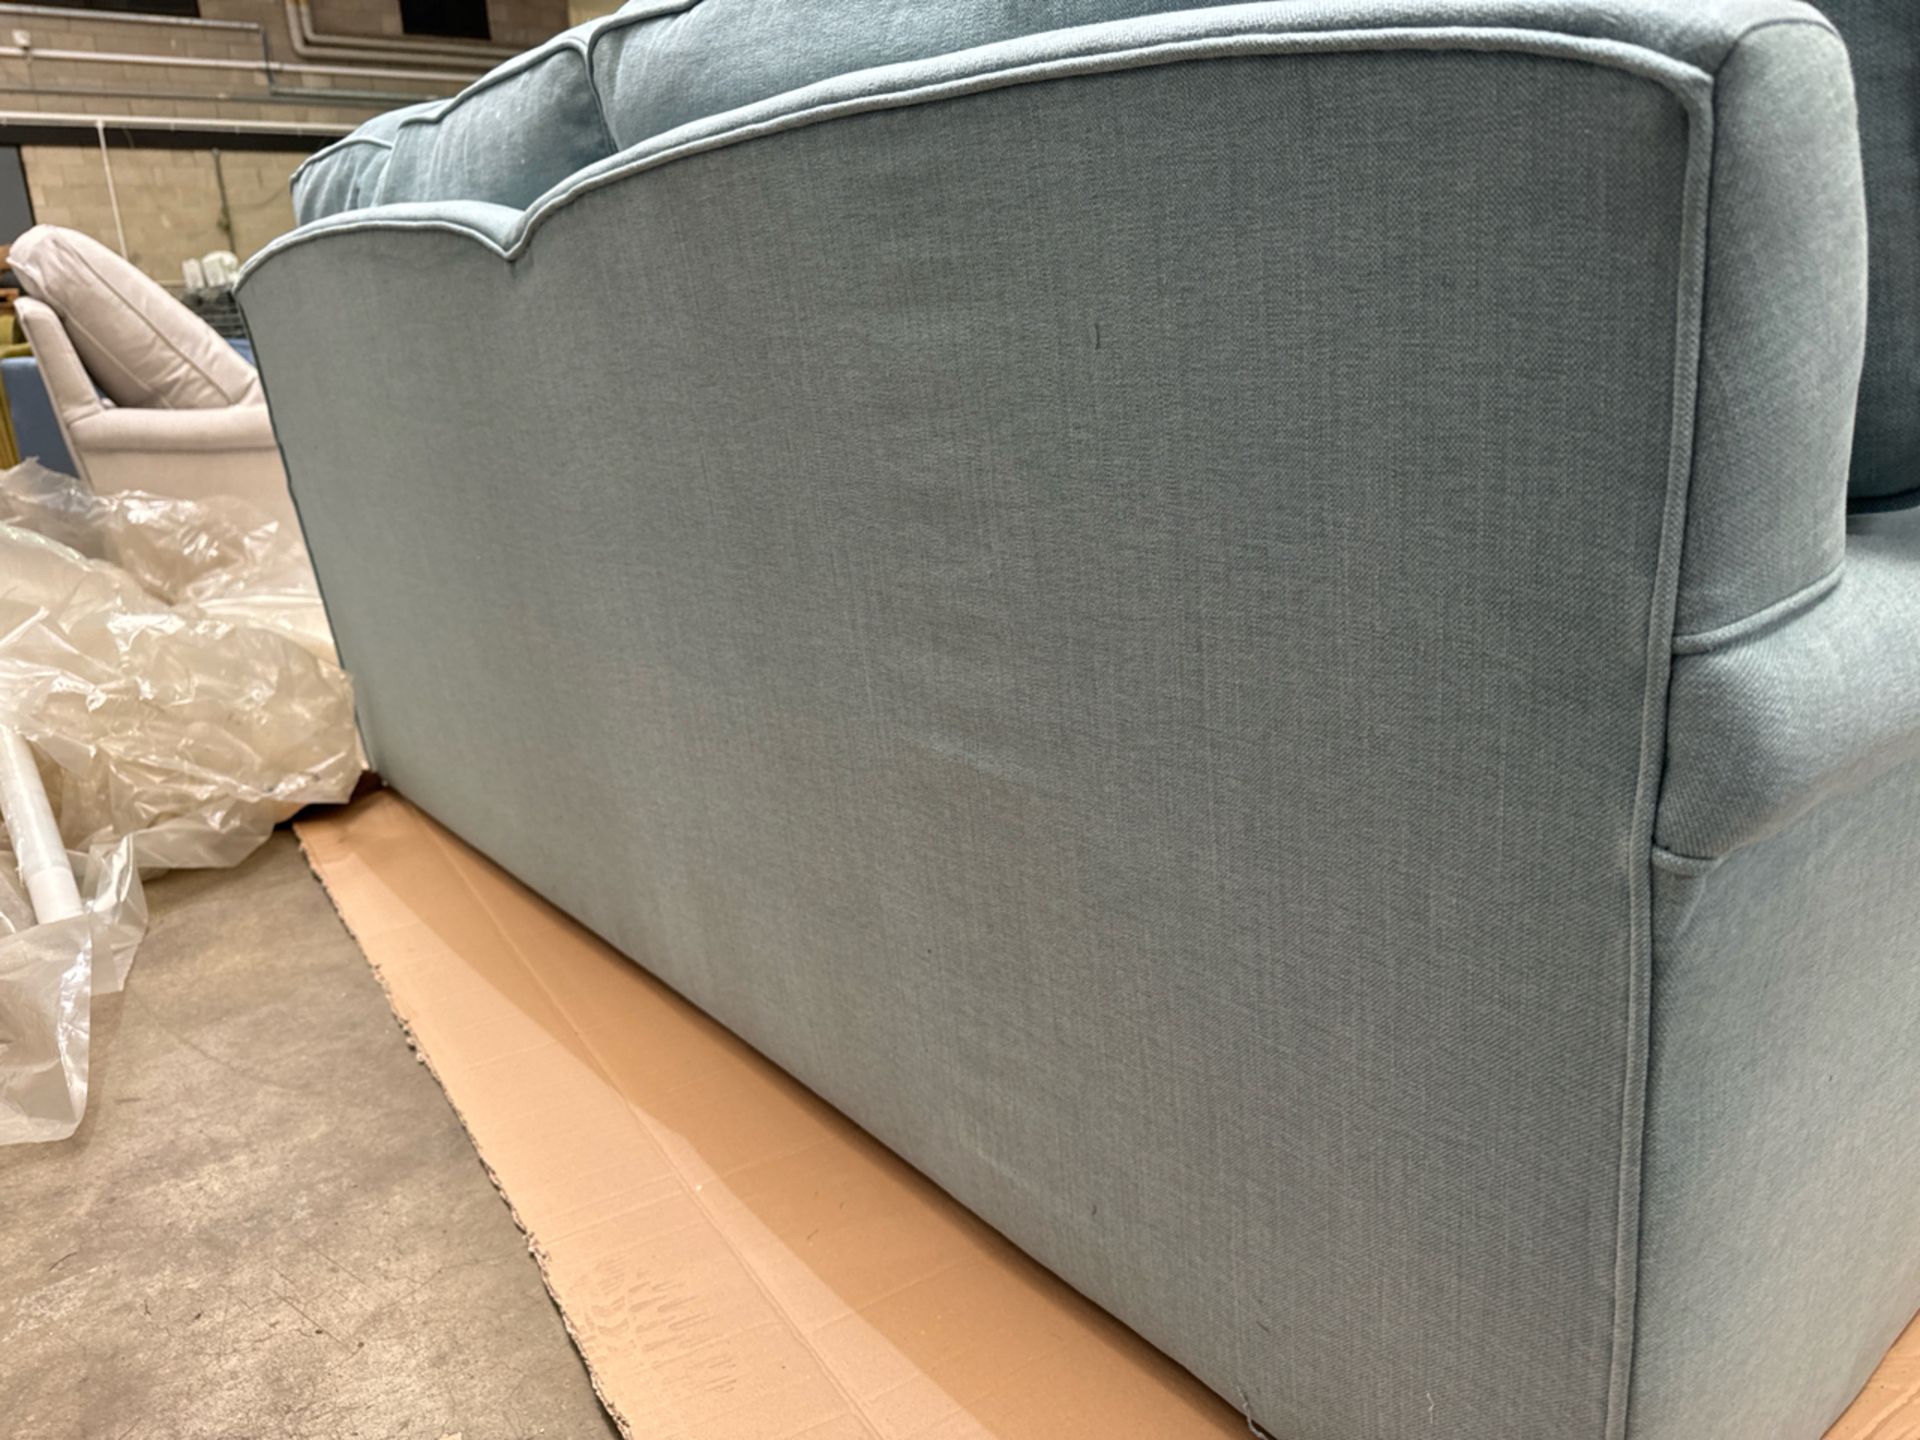 Bluebell 2.5 Seat Sofabed - Image 4 of 6